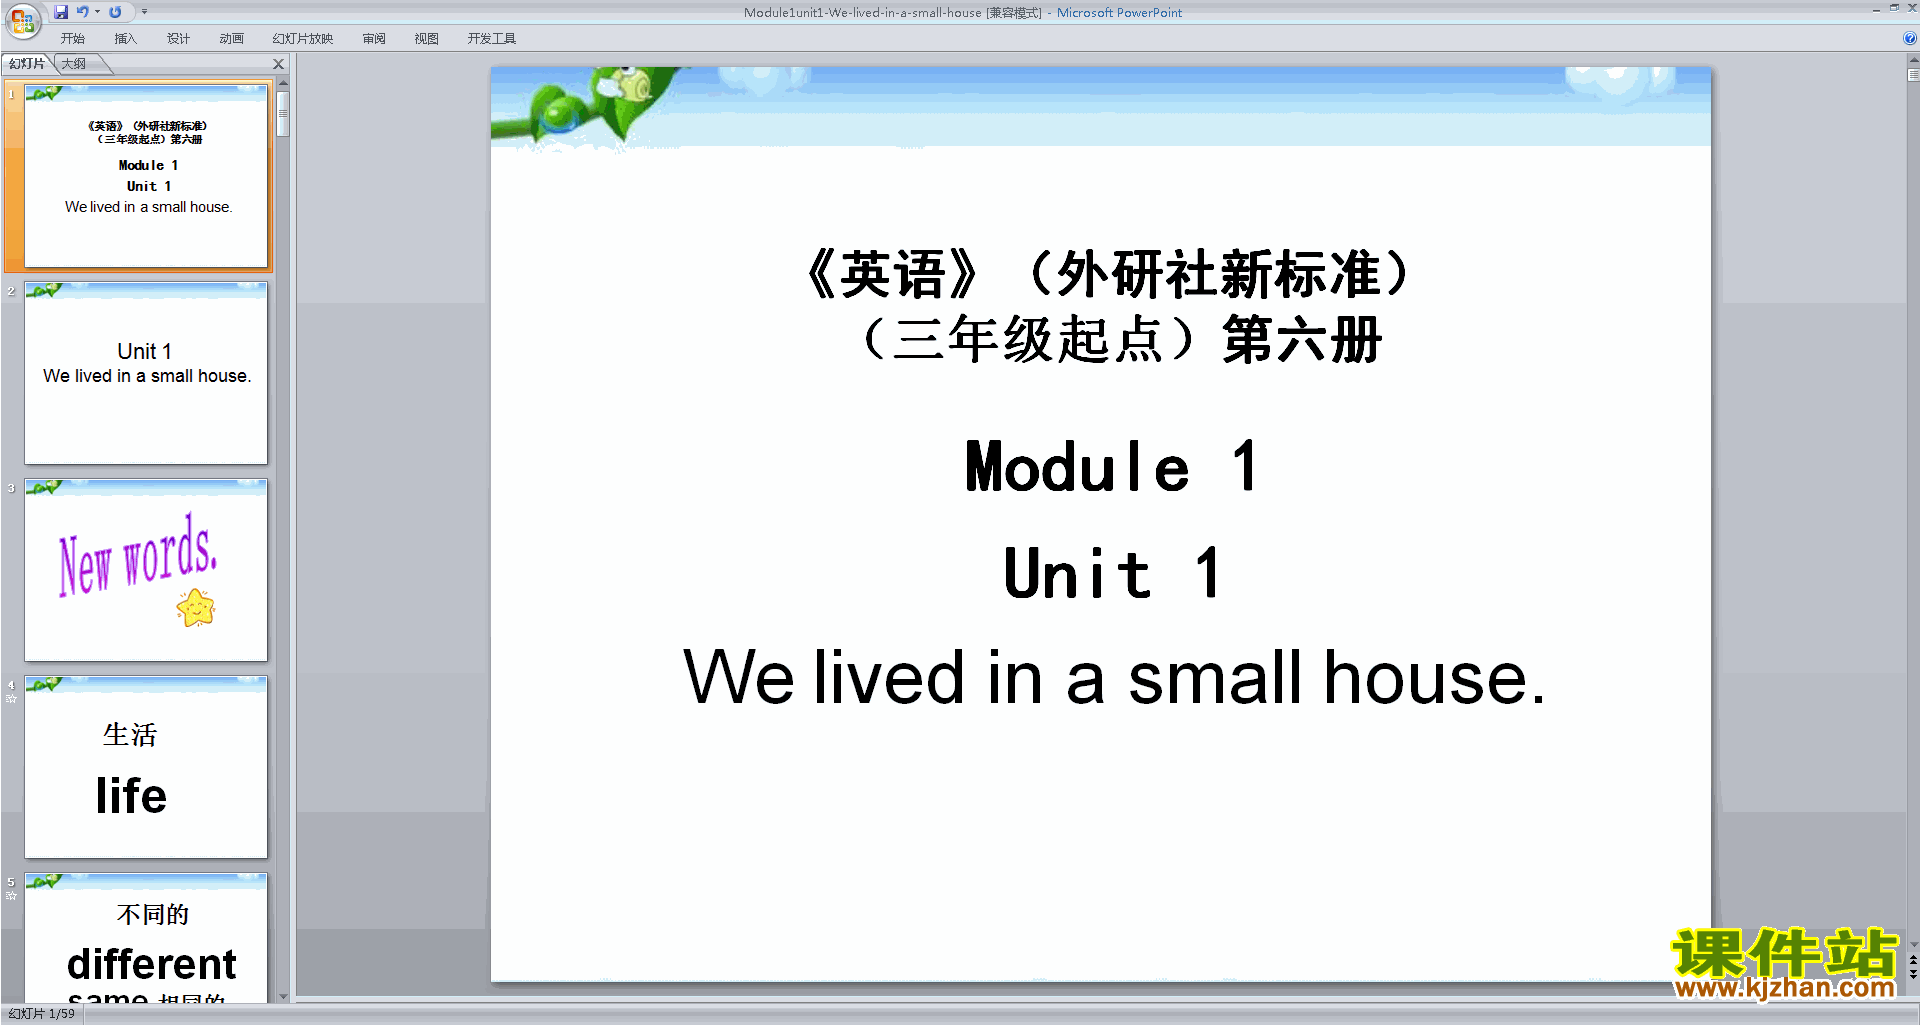 ʿModule1 Unit1 We lived in a small housepptμ